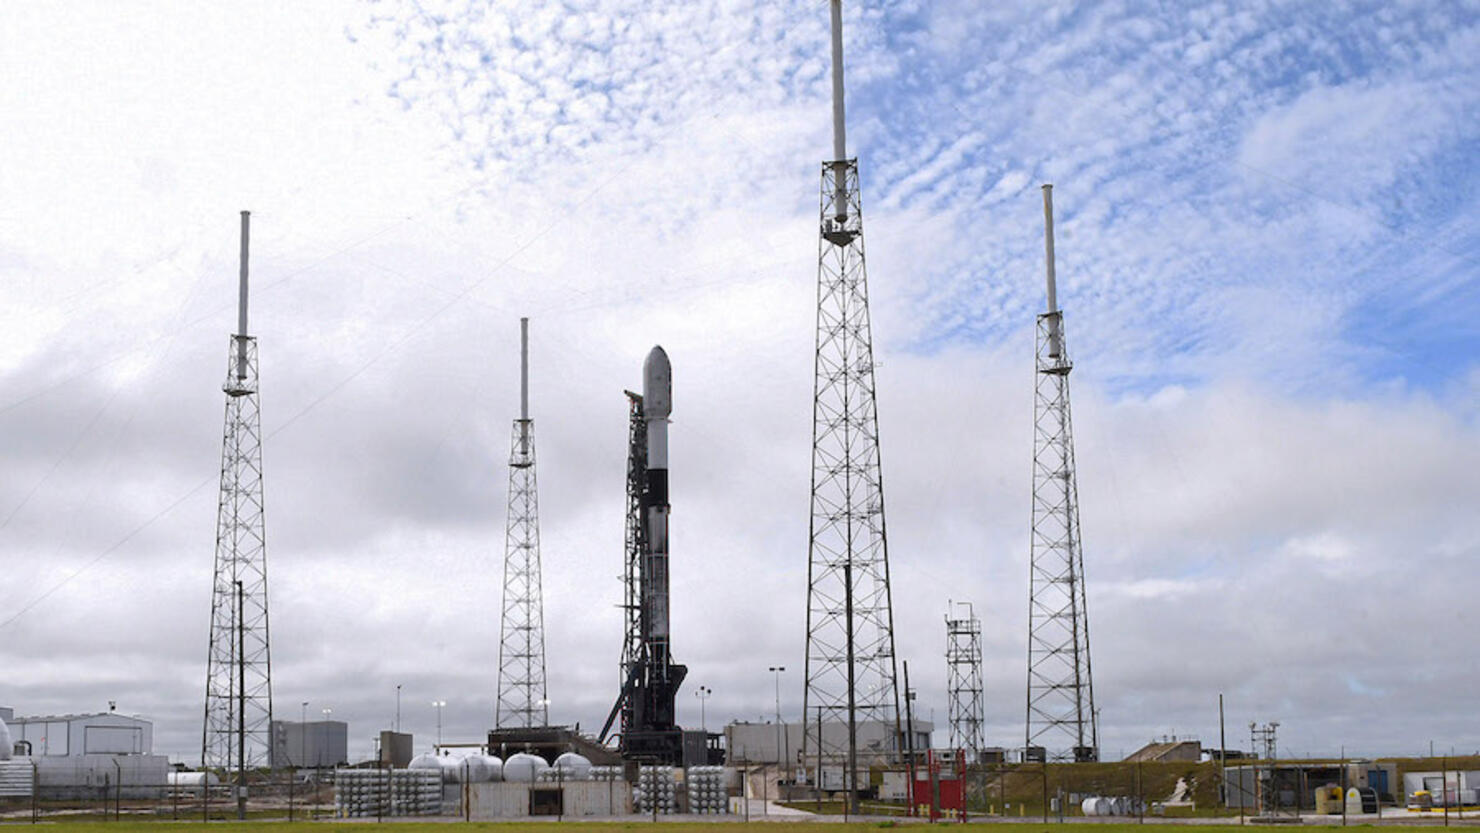 A SpaceX Falcon 9 rocket stands ready for launch at pad 40